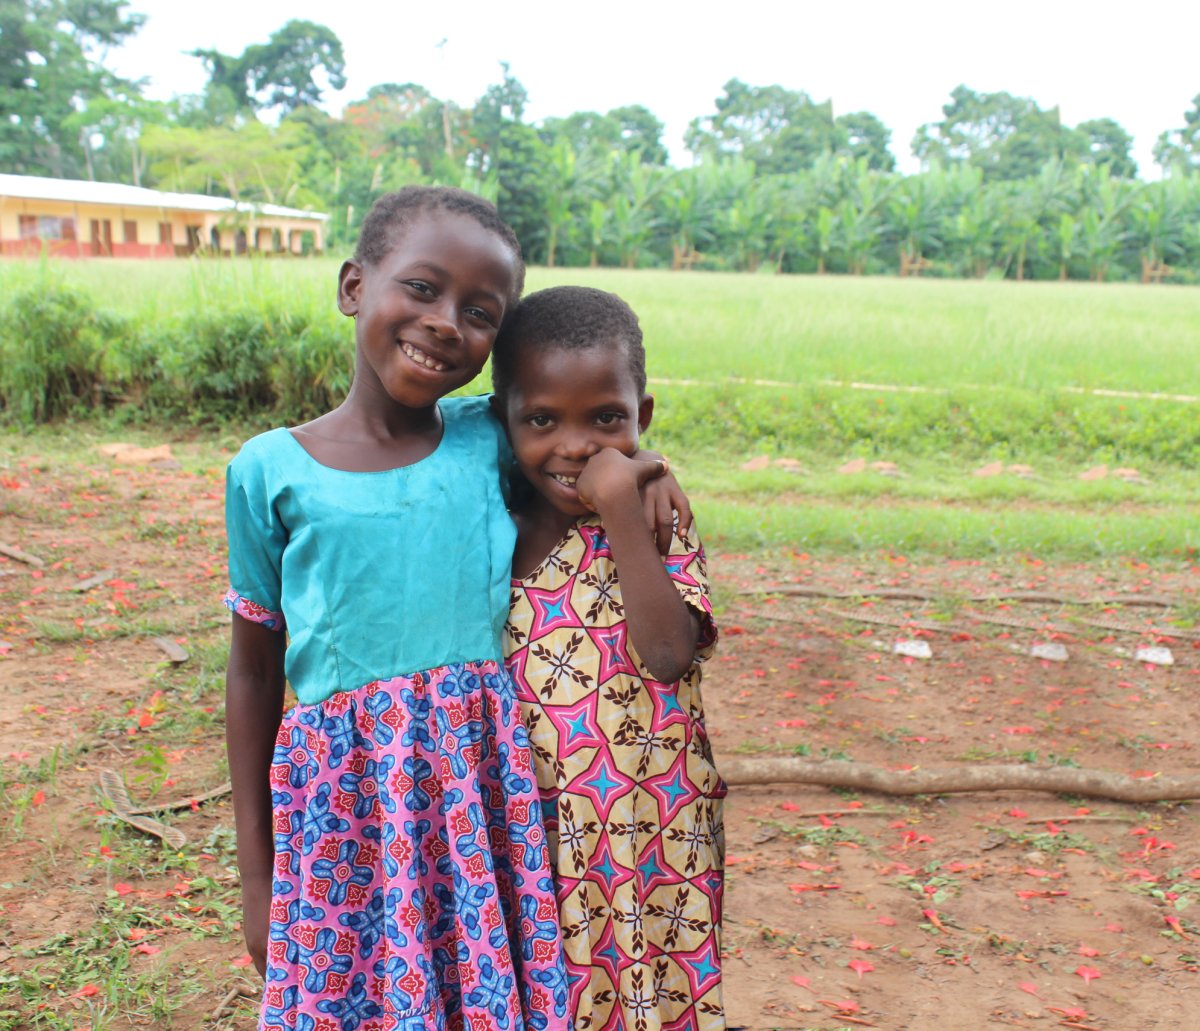 Children smiling for the camera in the first community.